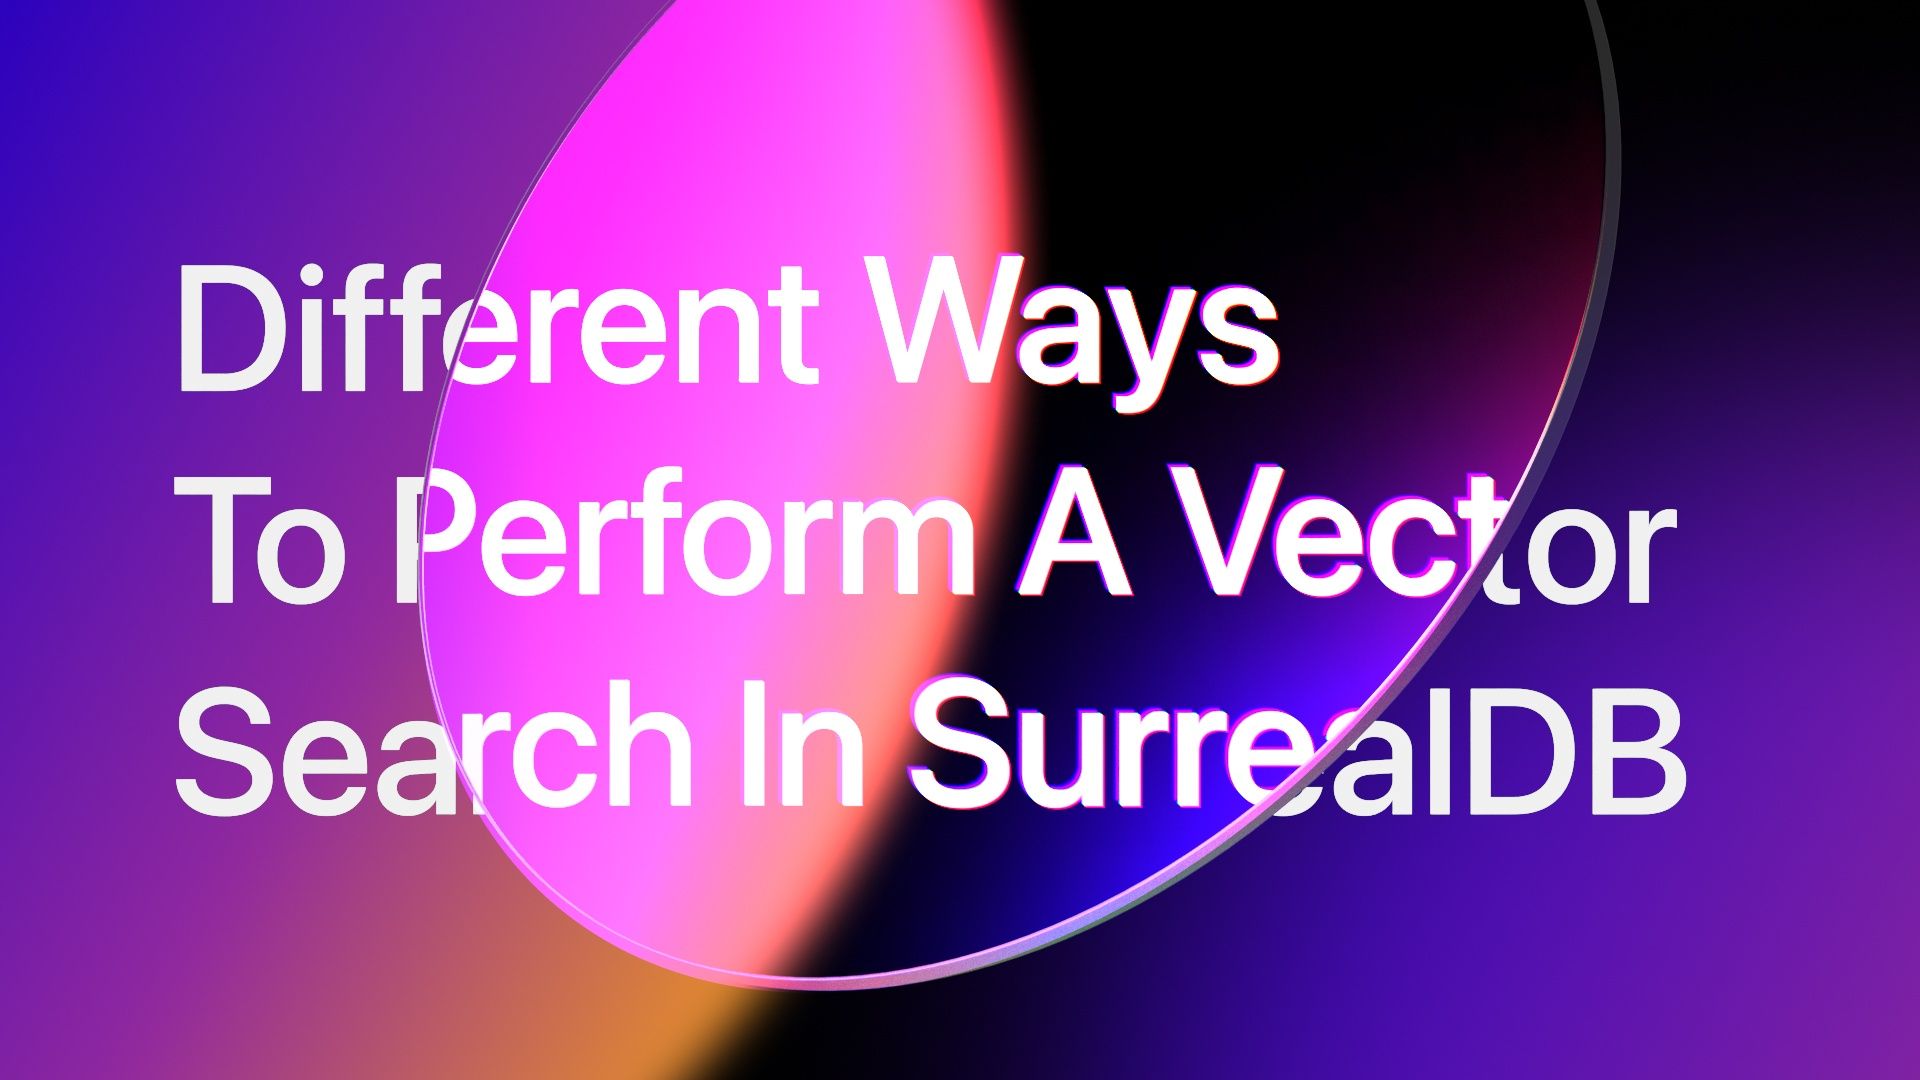 Different ways to perform a Vector Search in SurrealDB